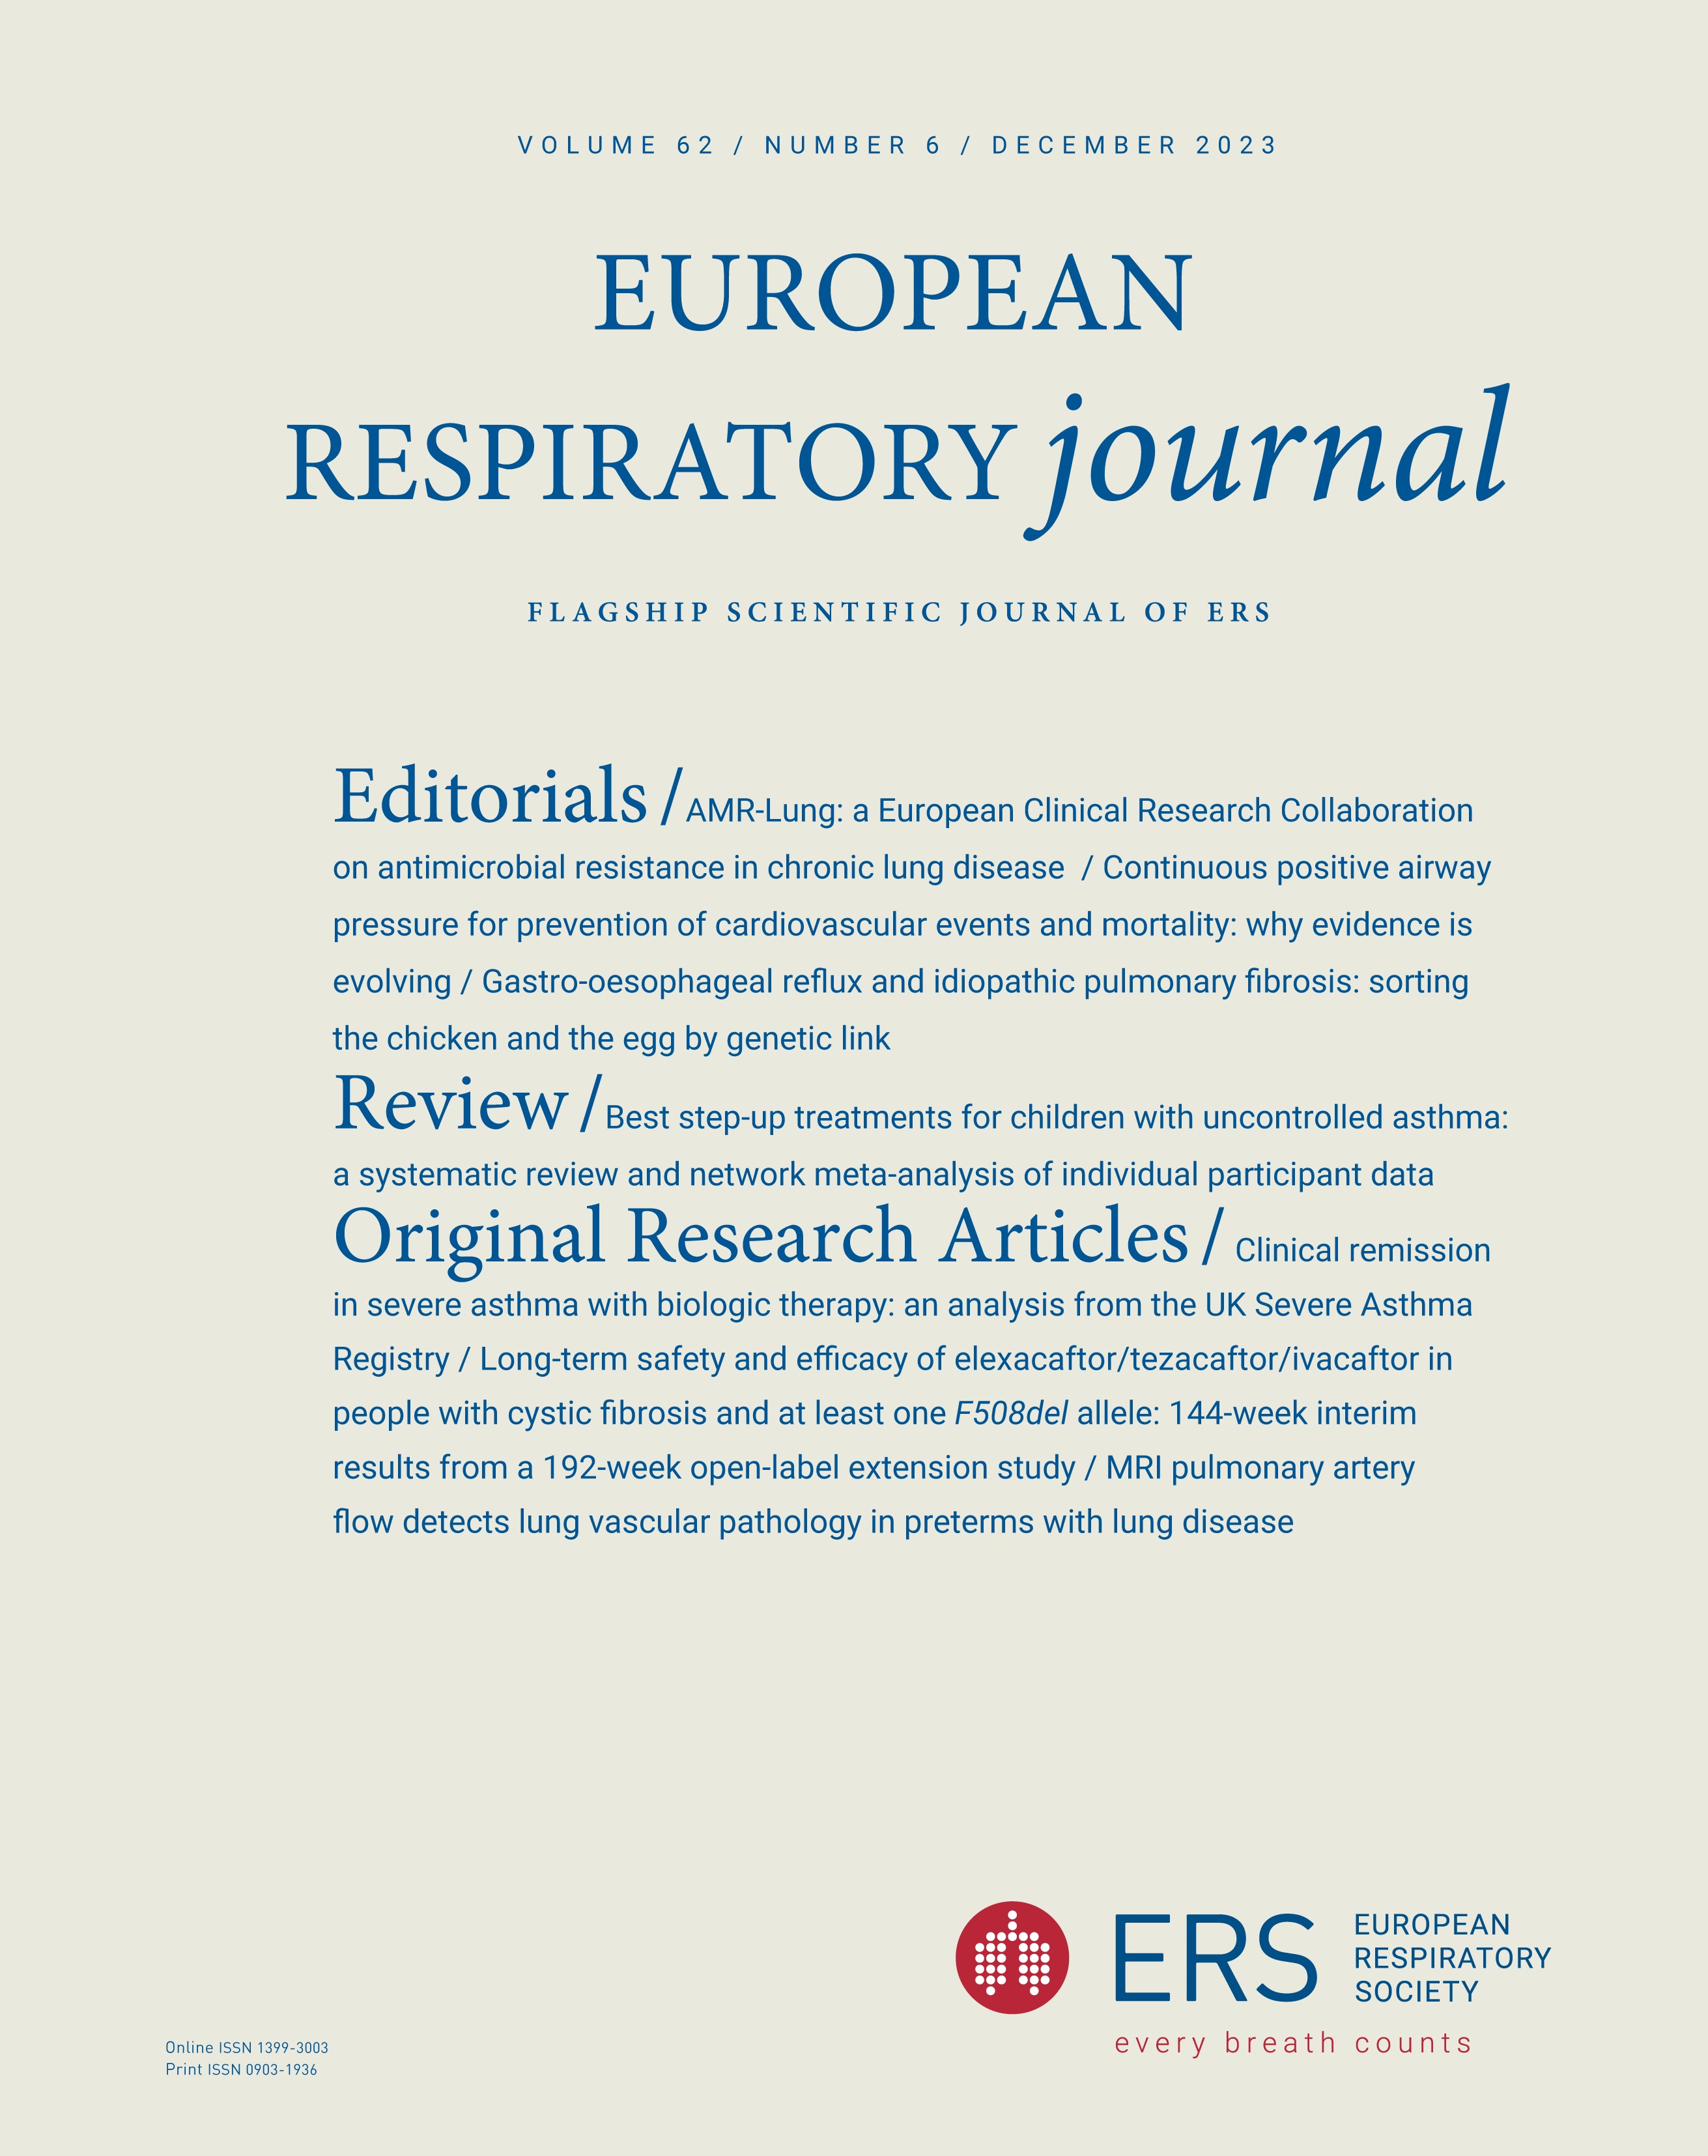 Diminished airway host innate response in people with cystic fibrosis who experience frequent pulmonary exacerbations